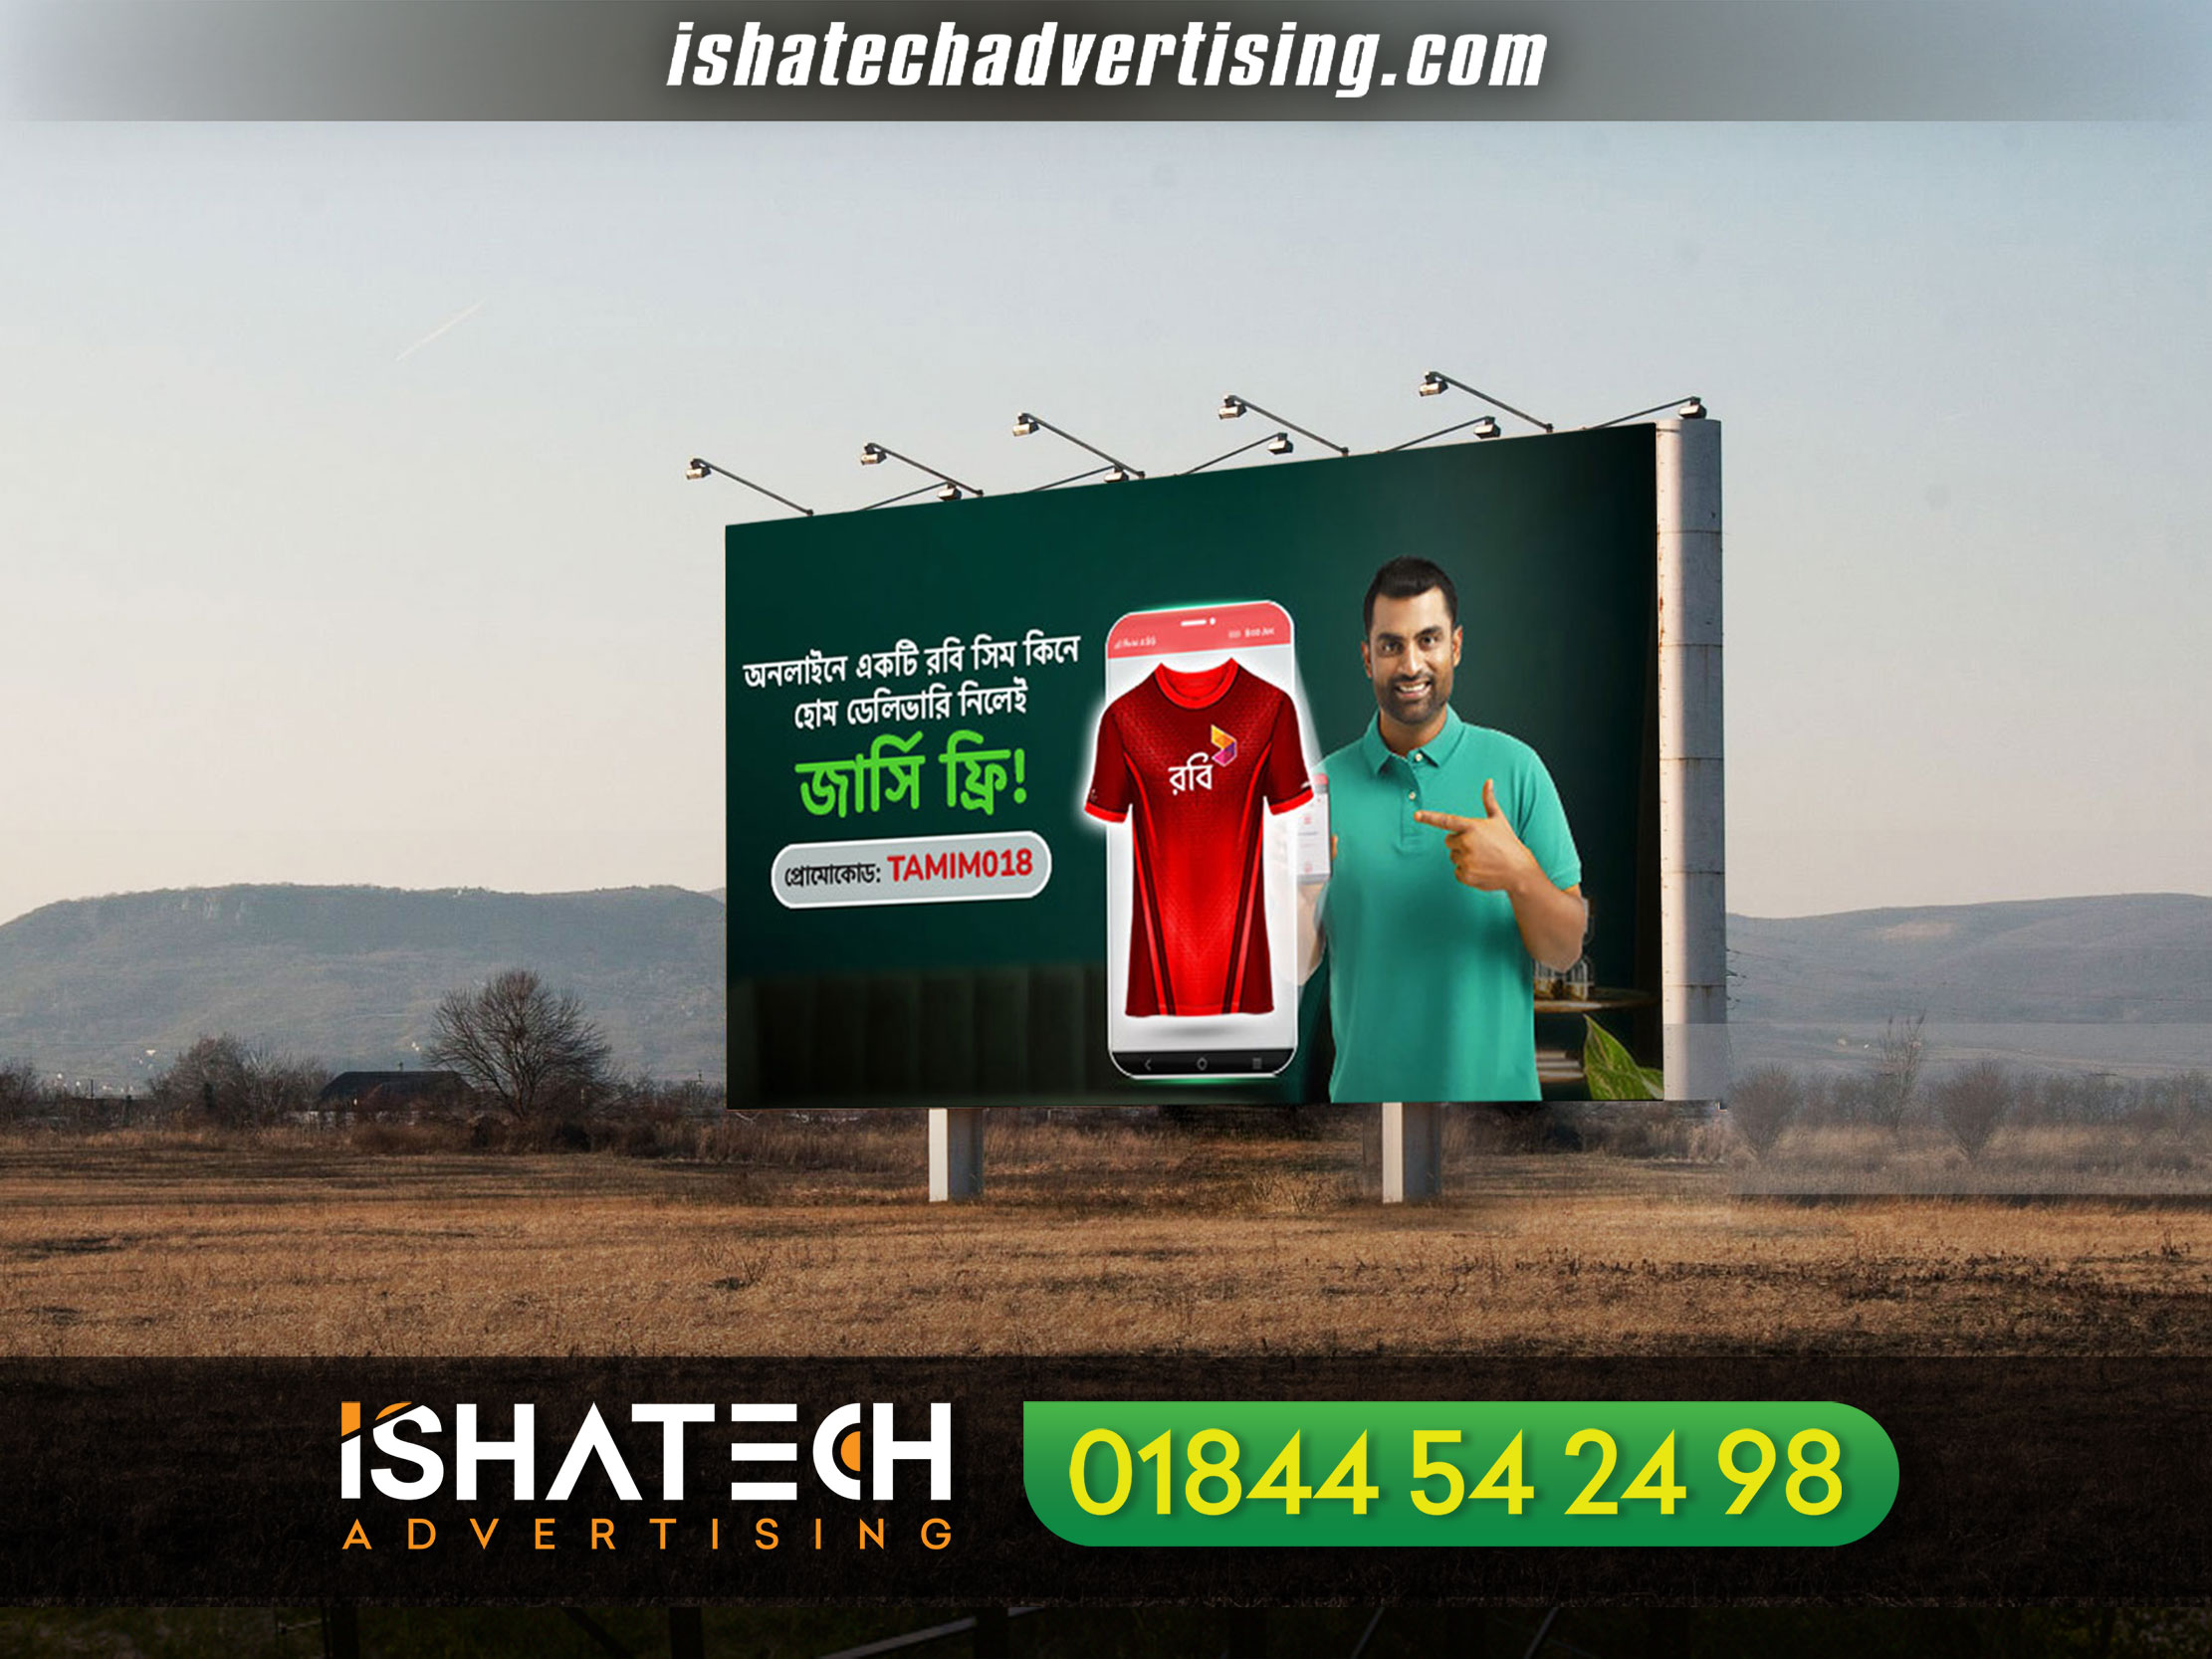 Product Advertising Billboard, Billboard Rental Service in Dhaka Bangladesh, Best led signboard BD, Project Billboard, Real estate billboard making in Dhaka BD, Best Led signboard making company, signboard bd, Billboard bd, Project Billboard Advertising Steel Billboard Structure Steel Board Outdoor Signage, All Kind of #DigitalPrint Pana, PVC, Shop Sign, Name Plate, #Lighting Sign Board, #LEDSign, Neon Sign, Acrylic Sign, Moving Display, #Billboard, Radio Ad, #NewspaperAd, TV Ad, #FairStall & Event #Management Ad Etc. Hope You’re Interest! #neonsign #signboard #eventmanagement #signage #stall #digitalprint #sign #display #board #acrylic #neon #plate #ledsign #lighting #printing #graphicdesign #service #marketing #ad #branding #print #advertising #BillBoard #DigitalBoard #SteelBoard #LocalBoard #StandBoardNonlitBoard #Structure #Structural. top billboard advertising agency in dhaka bangladesh. top 10 billboard advertising agency in dhaka bangladesh. list of billboard advertising agency in dhaka bangladesh. billboard advertising agency in dhaka bangladesh price. best billboard advertising agency in dhaka bangladesh. billboard advertising cost in bangladesh. billboard advertising bd. billboard rent in dhaka. Cement Company Billboard Making And Branding in Dhaka Bangladesh, Best Led Signboard Making Company in Dhaka Bangladesh, Billboard Ads, Billboard Ads Pro, Billboard Making BD, Best Led Signboard Making in Dhaka Bangladesh. Signboard BD, Billboard Rental Company in Dhaka Bangladesh. Wall Billboard Making, Side Billboard Rental service in Dhaka BD,